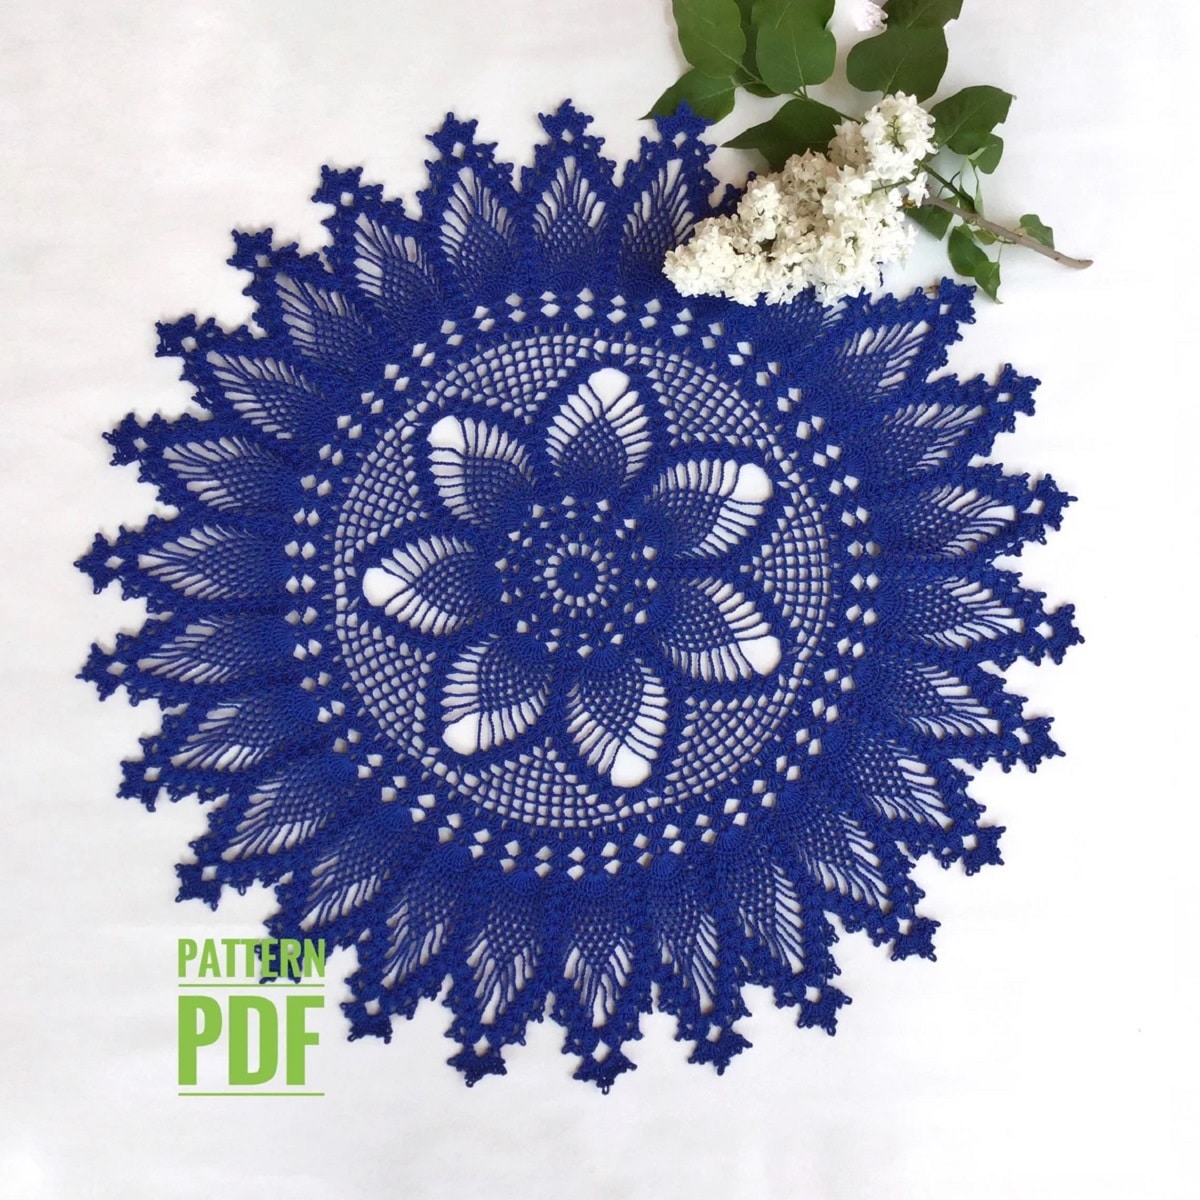 Navy blue crochet doily with a flower in the center of a circle surrounded by pineapples stitched into petals on a white background.